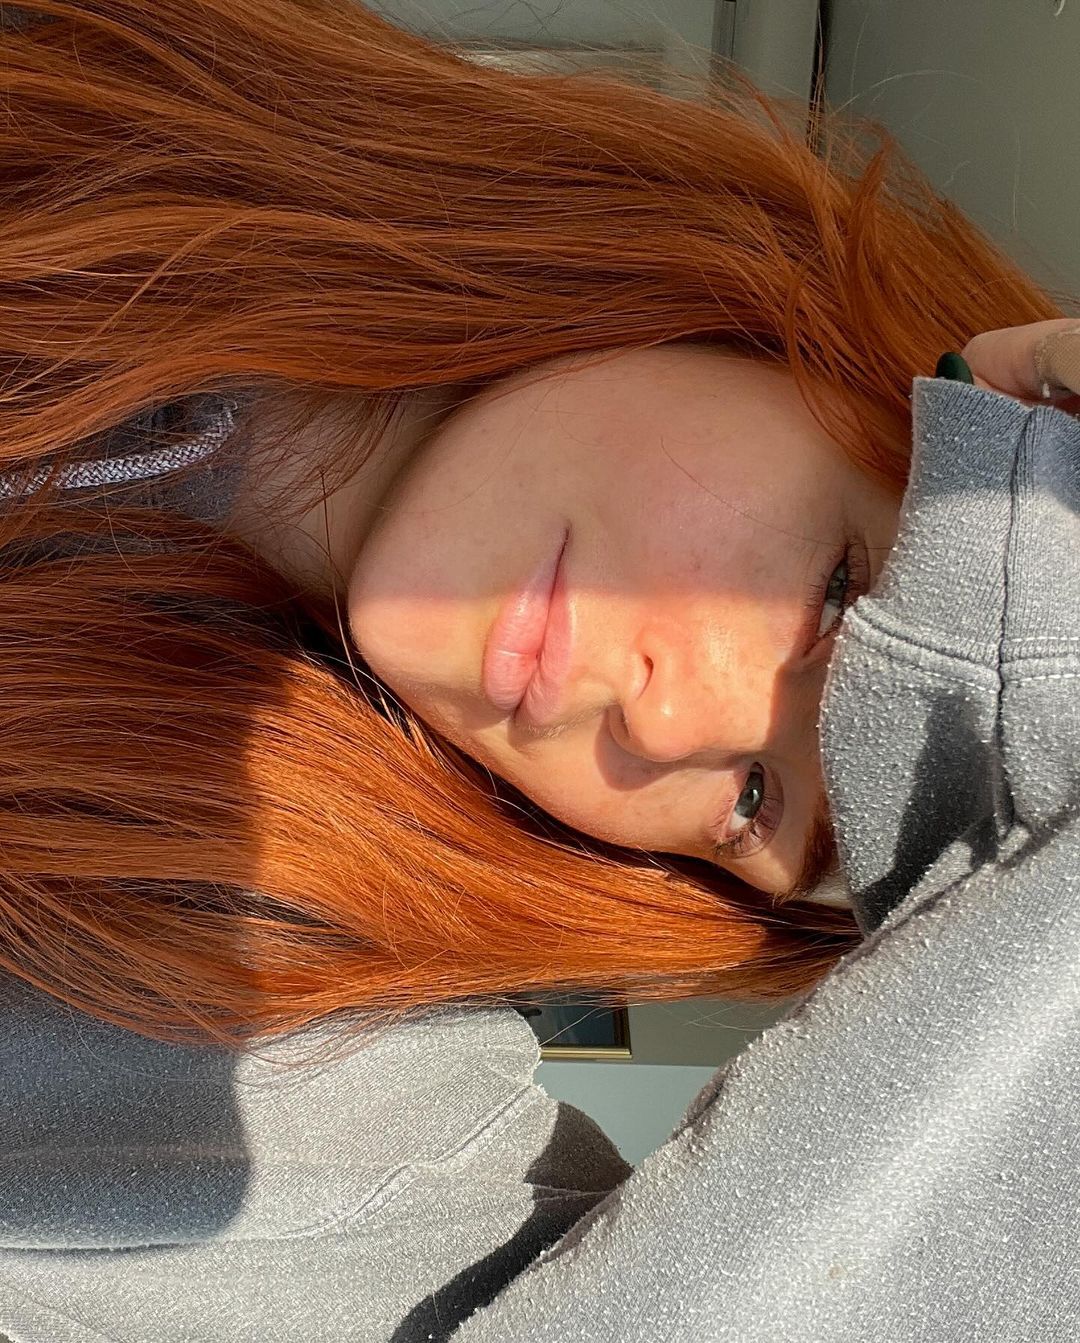 A person with striking red hair partially covering their face with a grey sleeve, accented by sunlight